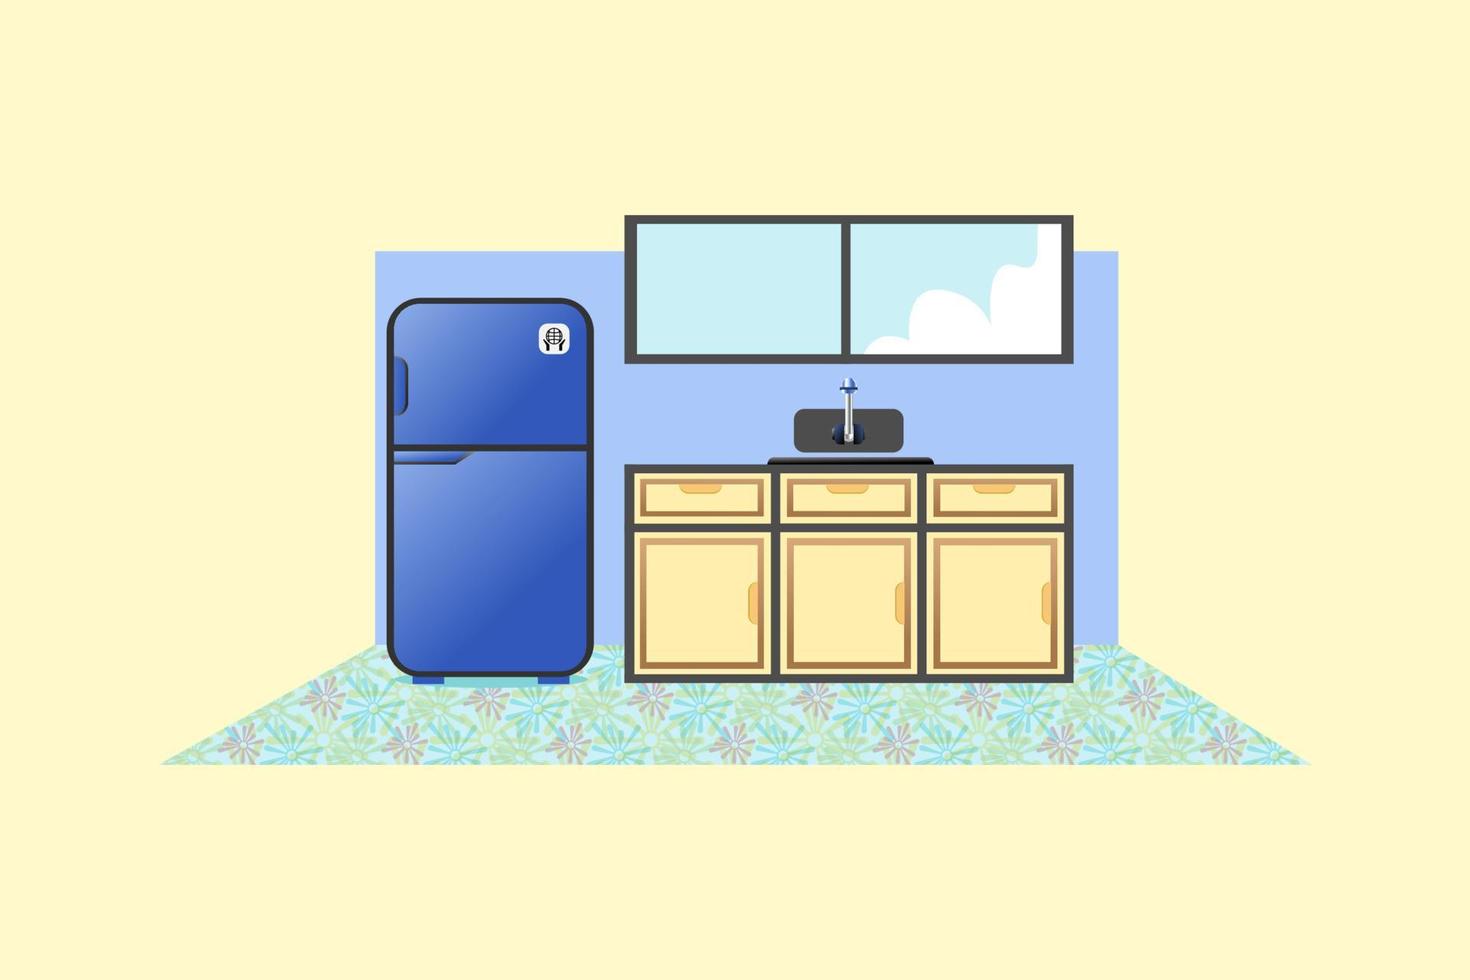 Illustration of kitchen interior with refrigerator, sink, window, stove, and cabinet vector